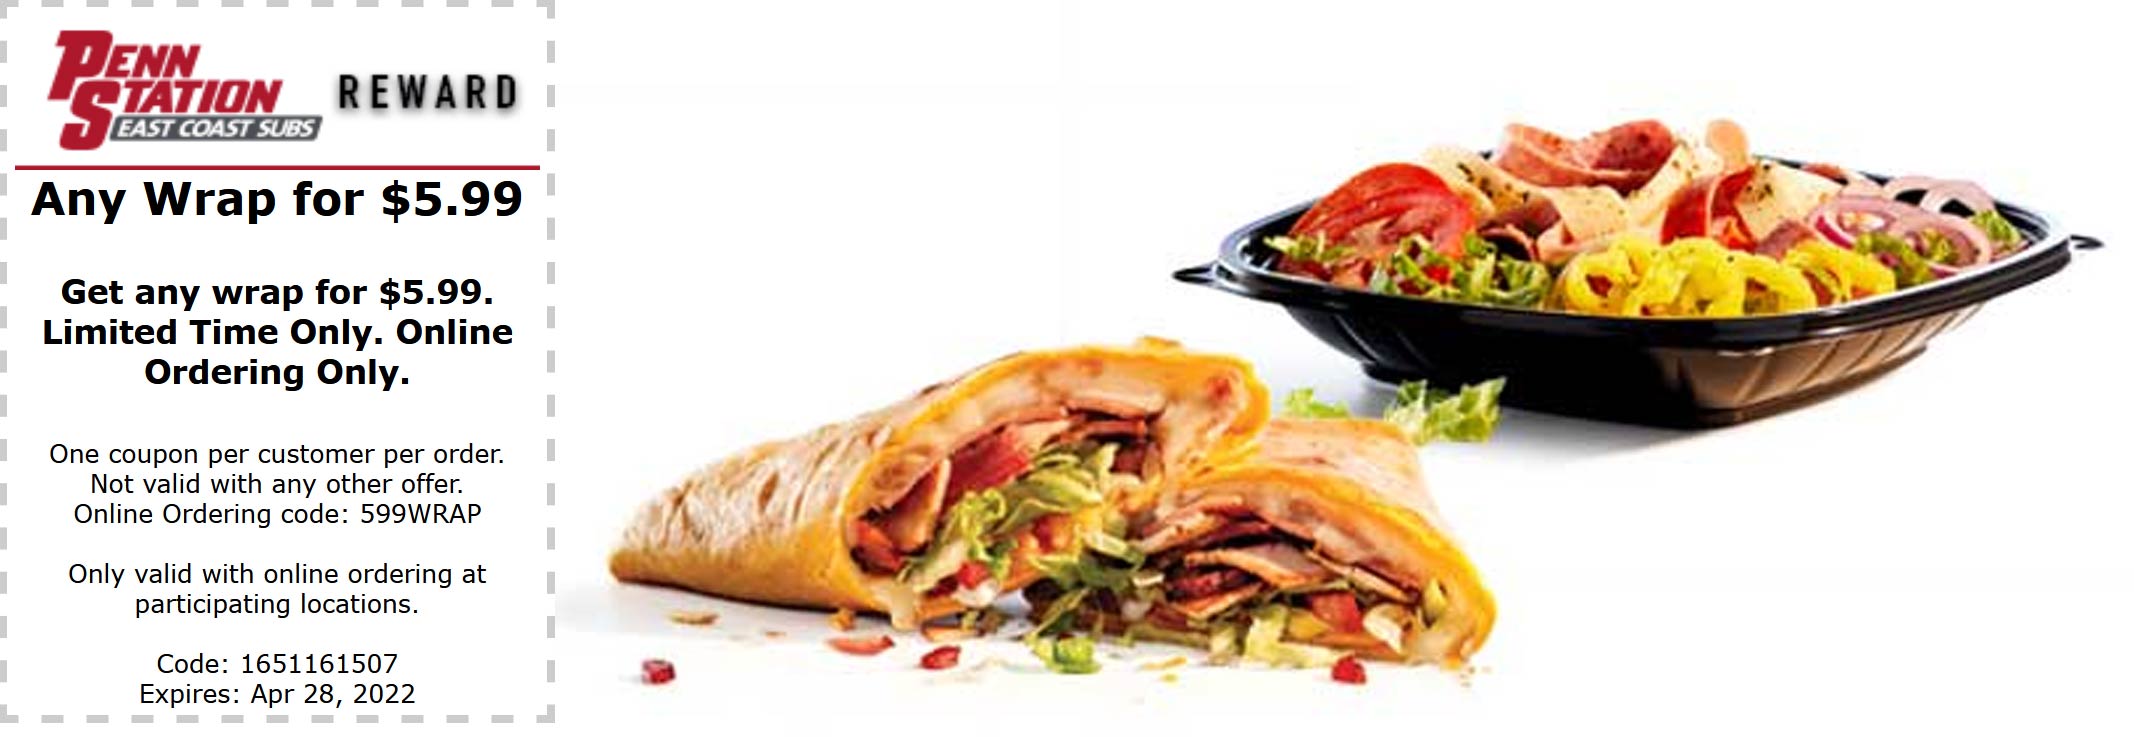 Penn Station restaurants Coupon  $6 sandwich wrap today at Penn Station subs #pennstation 